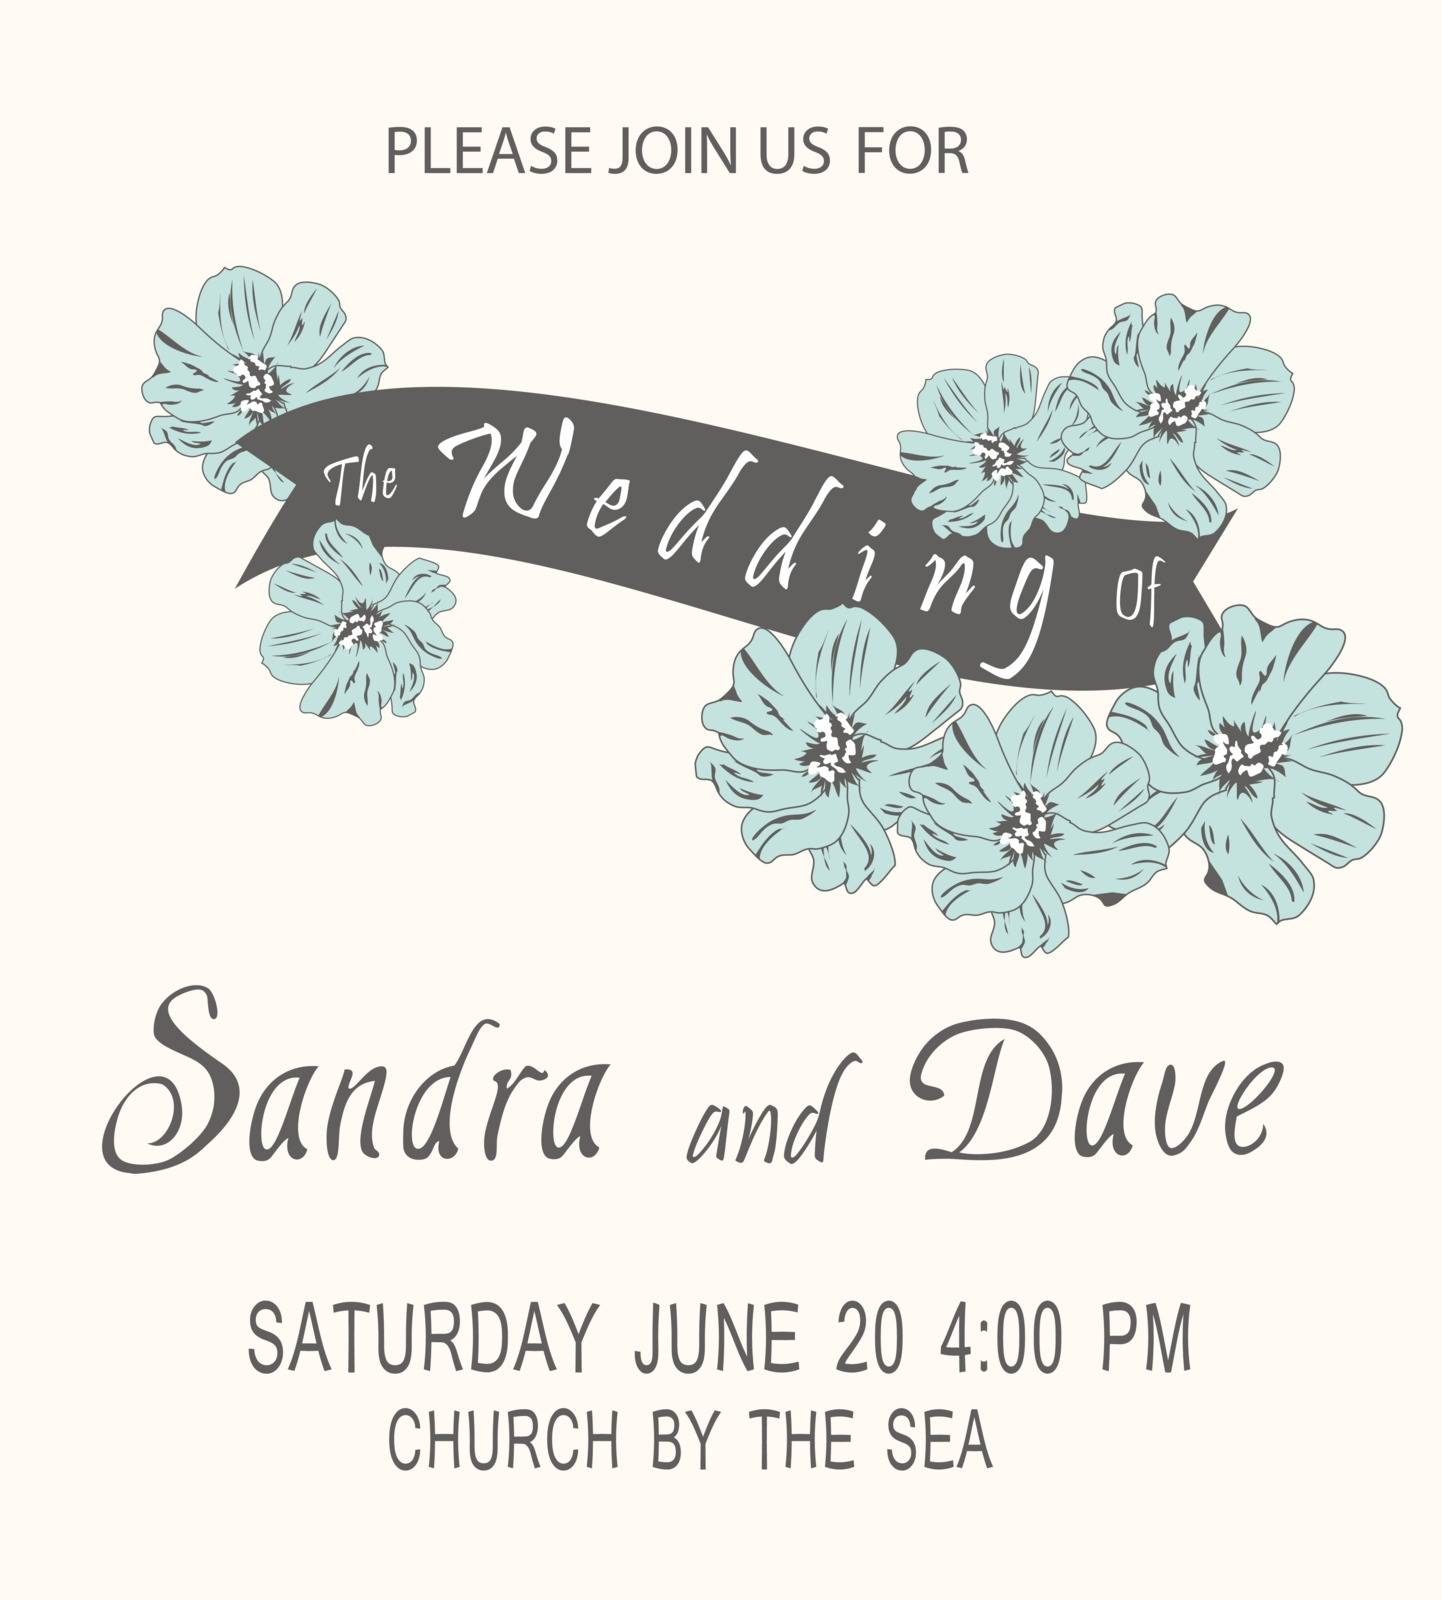 vector illustration of a wedding invitation with flowers